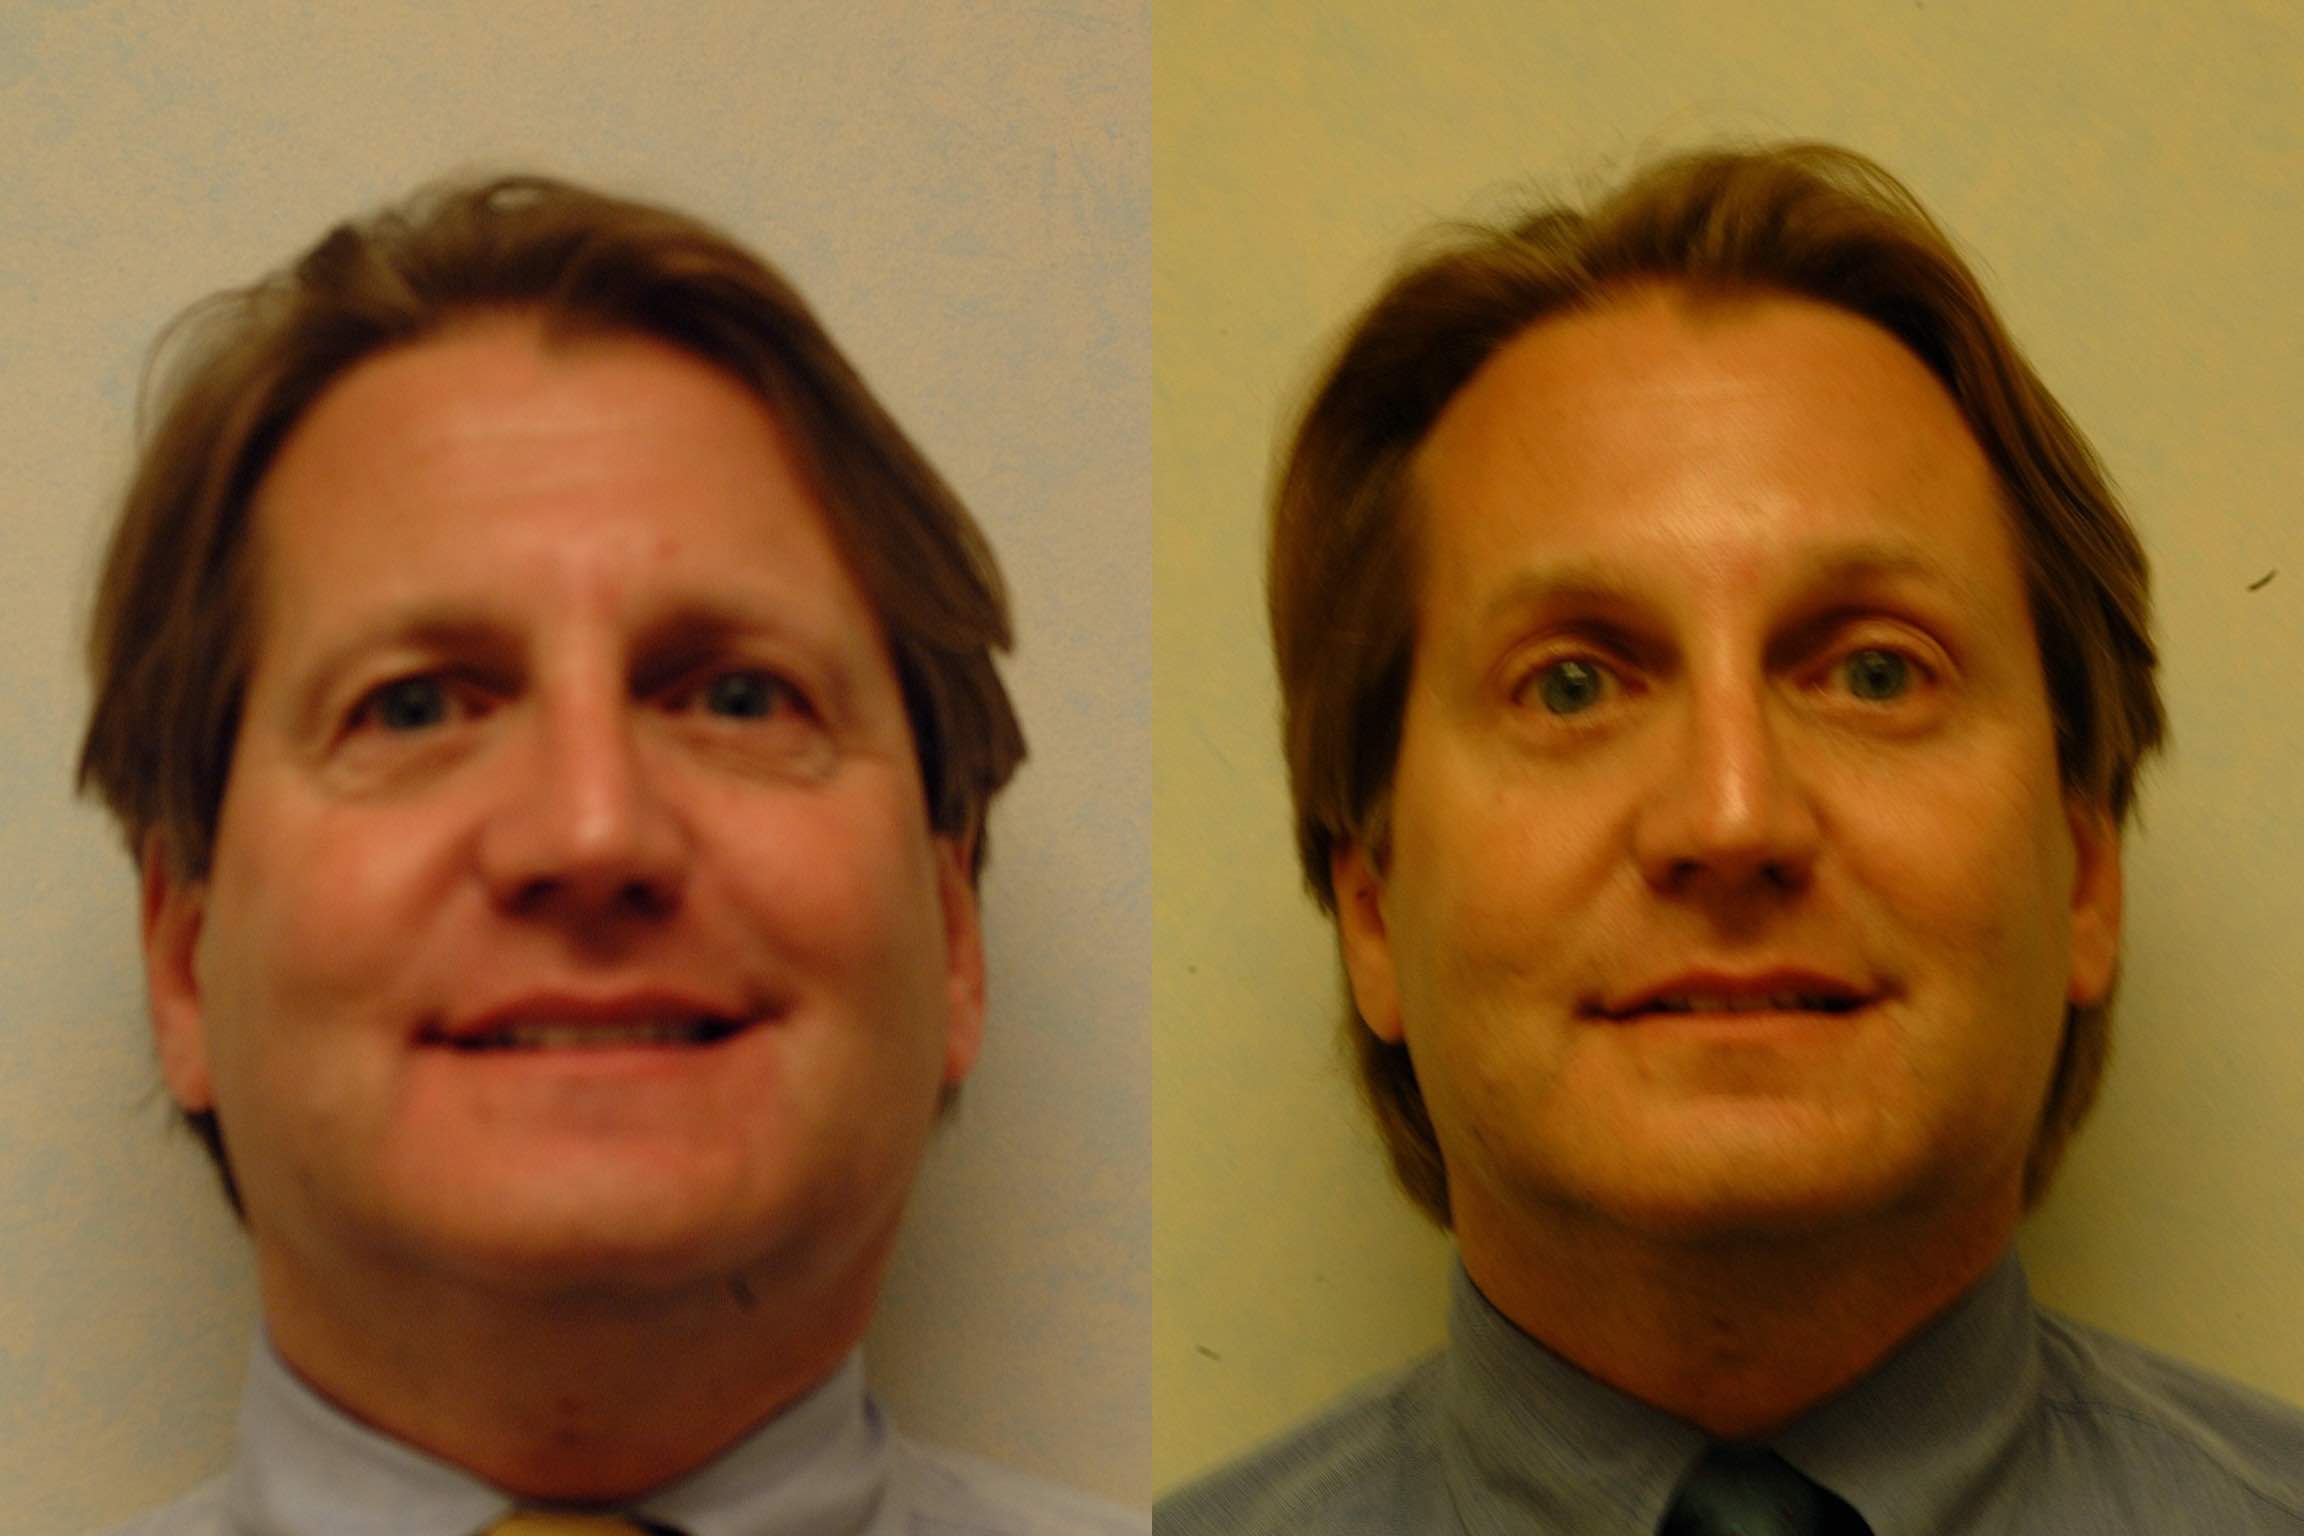 Before and after, 5 mo post op from Endo Brow Lift and Upper and Lower Blepharoplasty performed by Dr. Paul Vanek (front view)